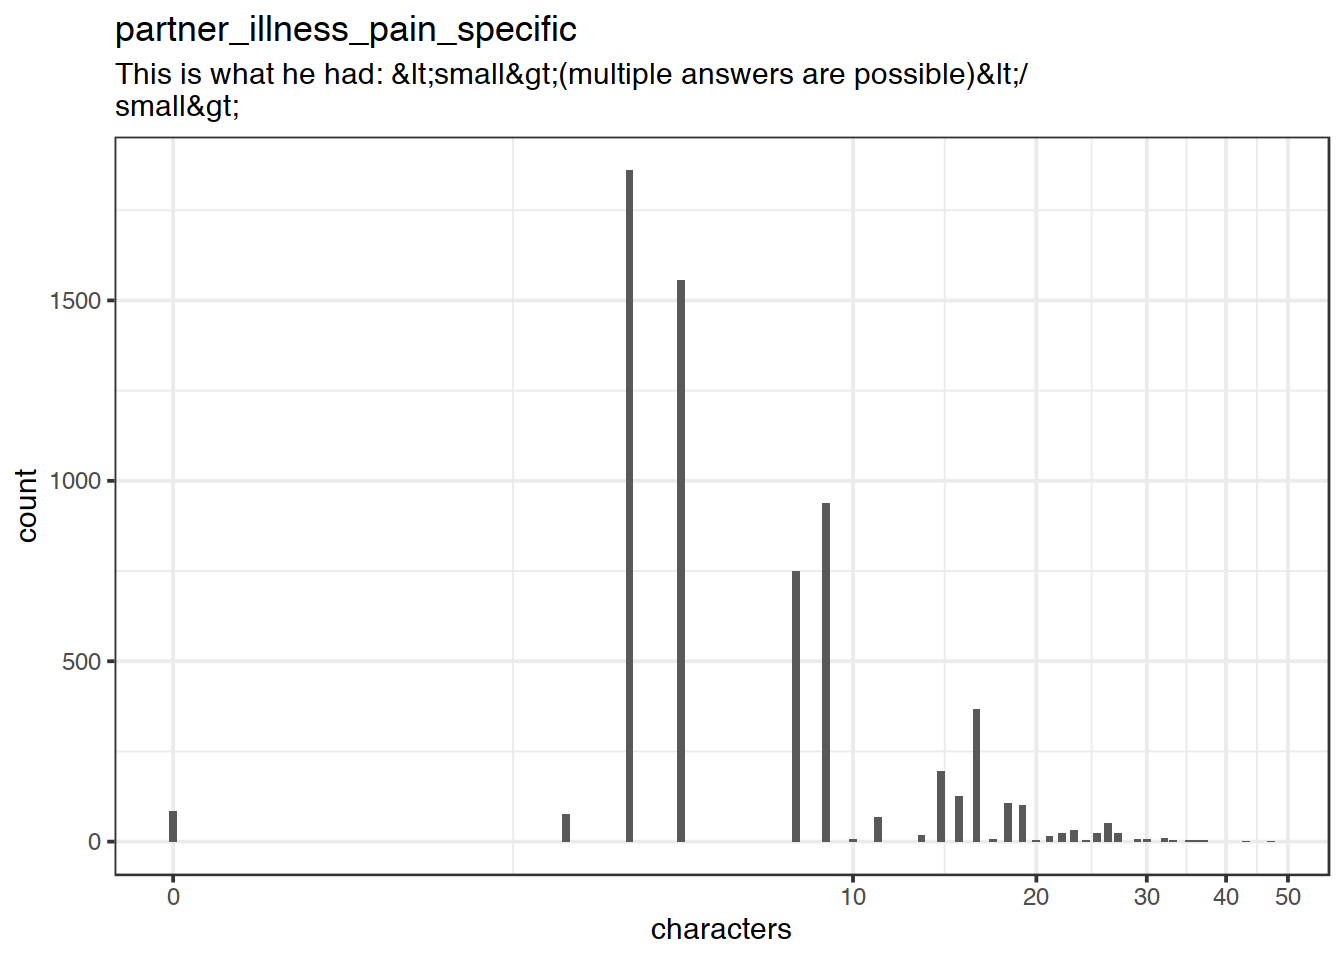 Distribution of values for partner_illness_pain_specific